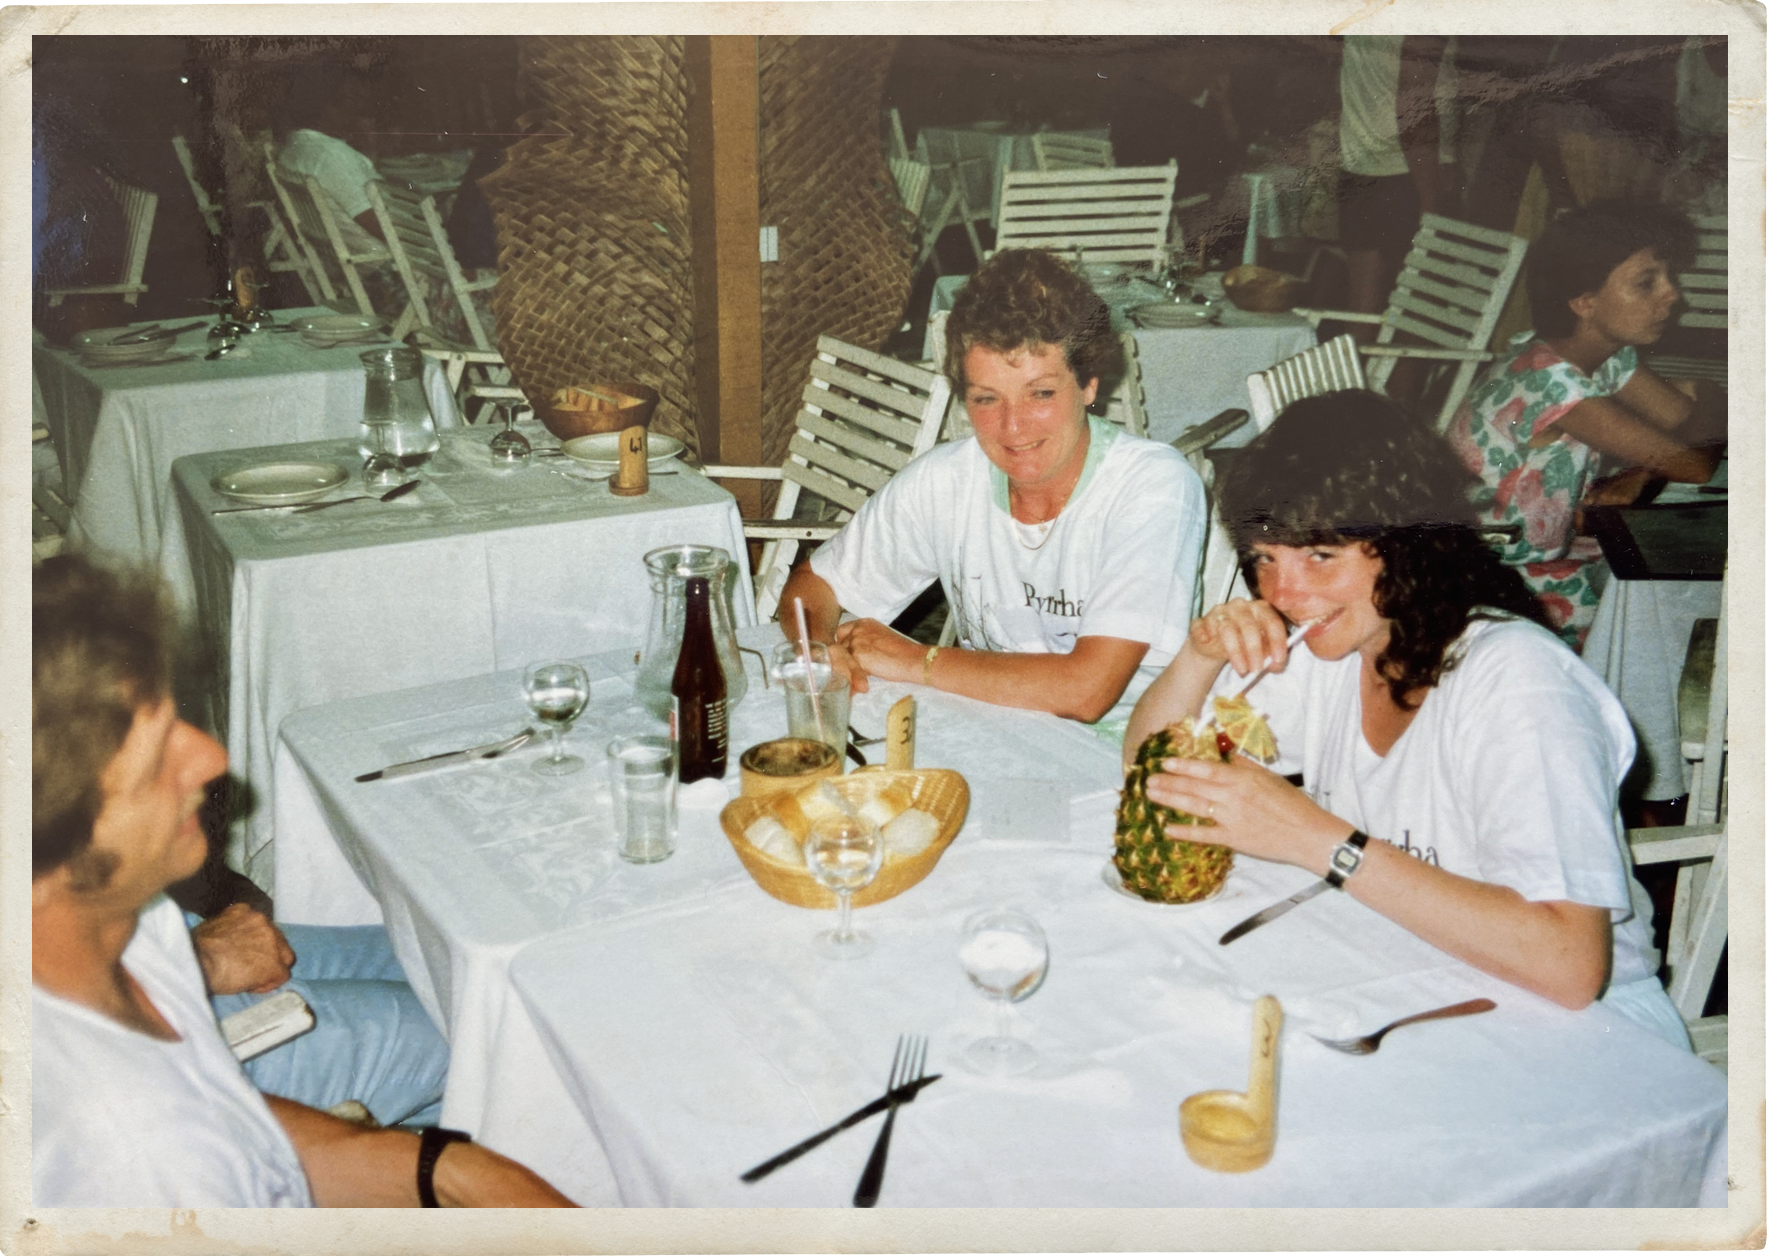 Karen Mason, right, and Kearney Mason, left, helped chaperone a Hadley-Luzerne school trip to Martinique in the 1980s.